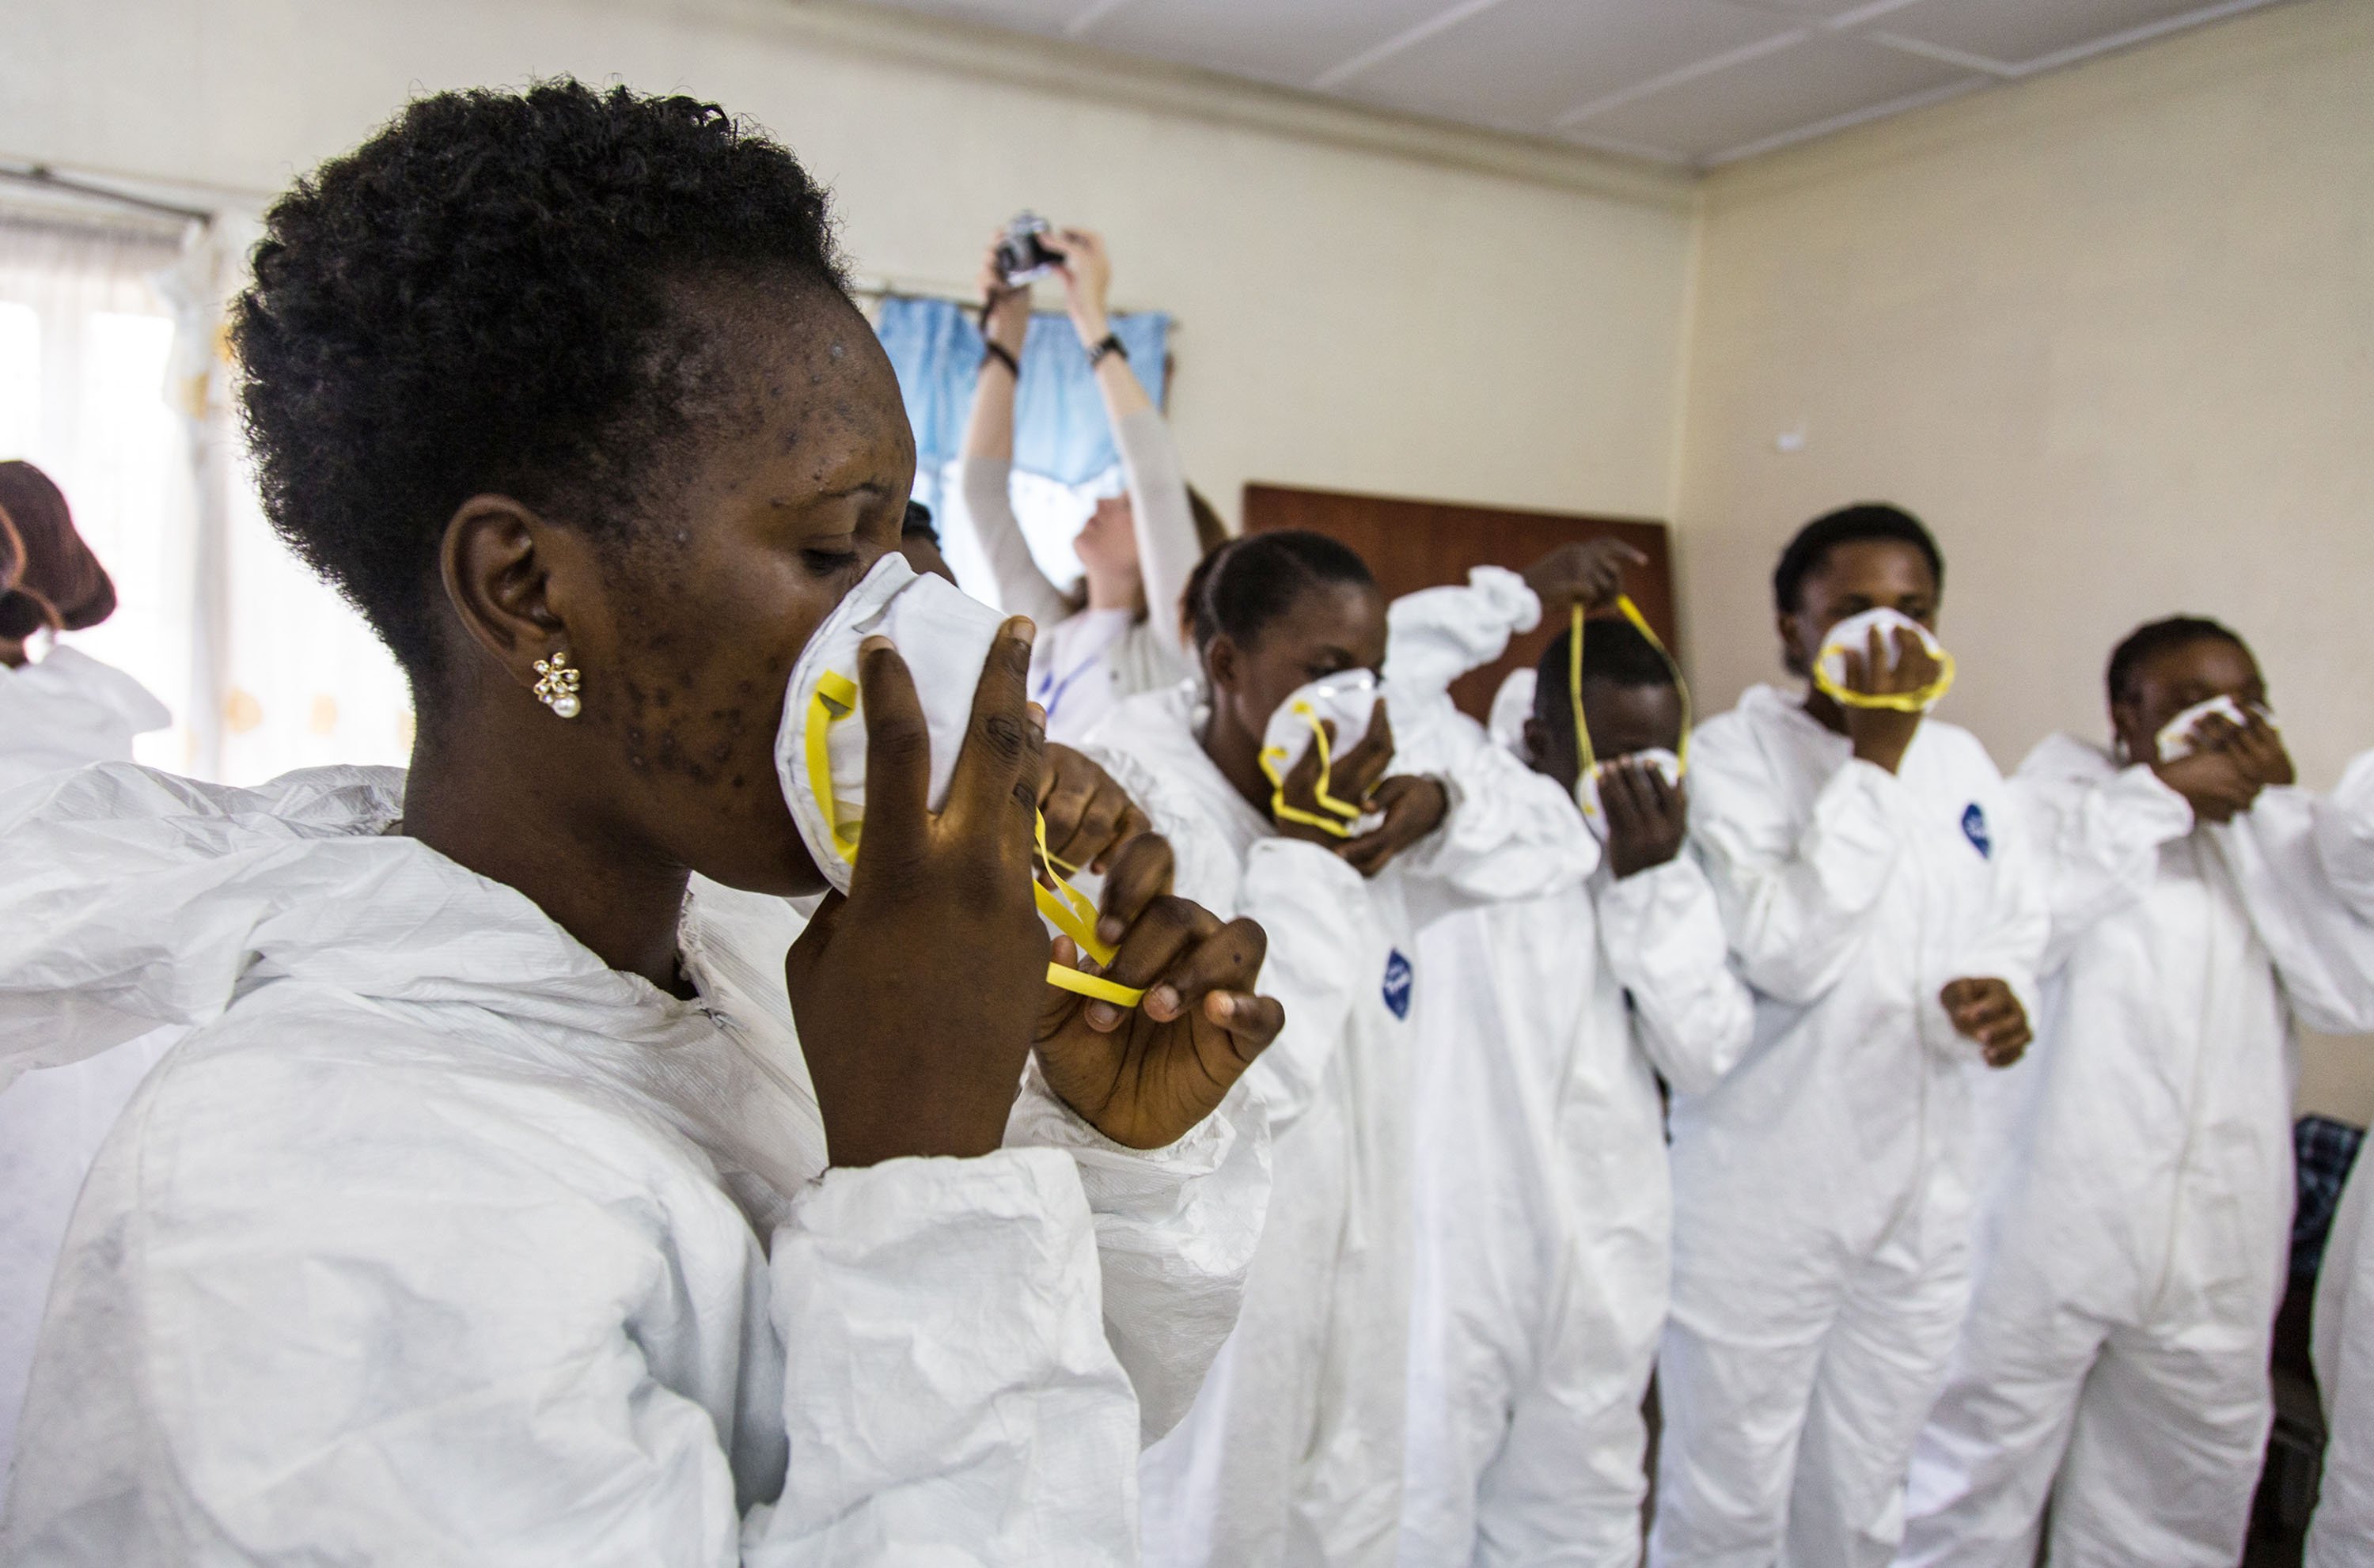 Nurses train to use Ebola protective gear with World Health Organization, WHO, workers, in Freetown, Sierra Leone on Sept. 18, 2014. (Michael Duff—AP)